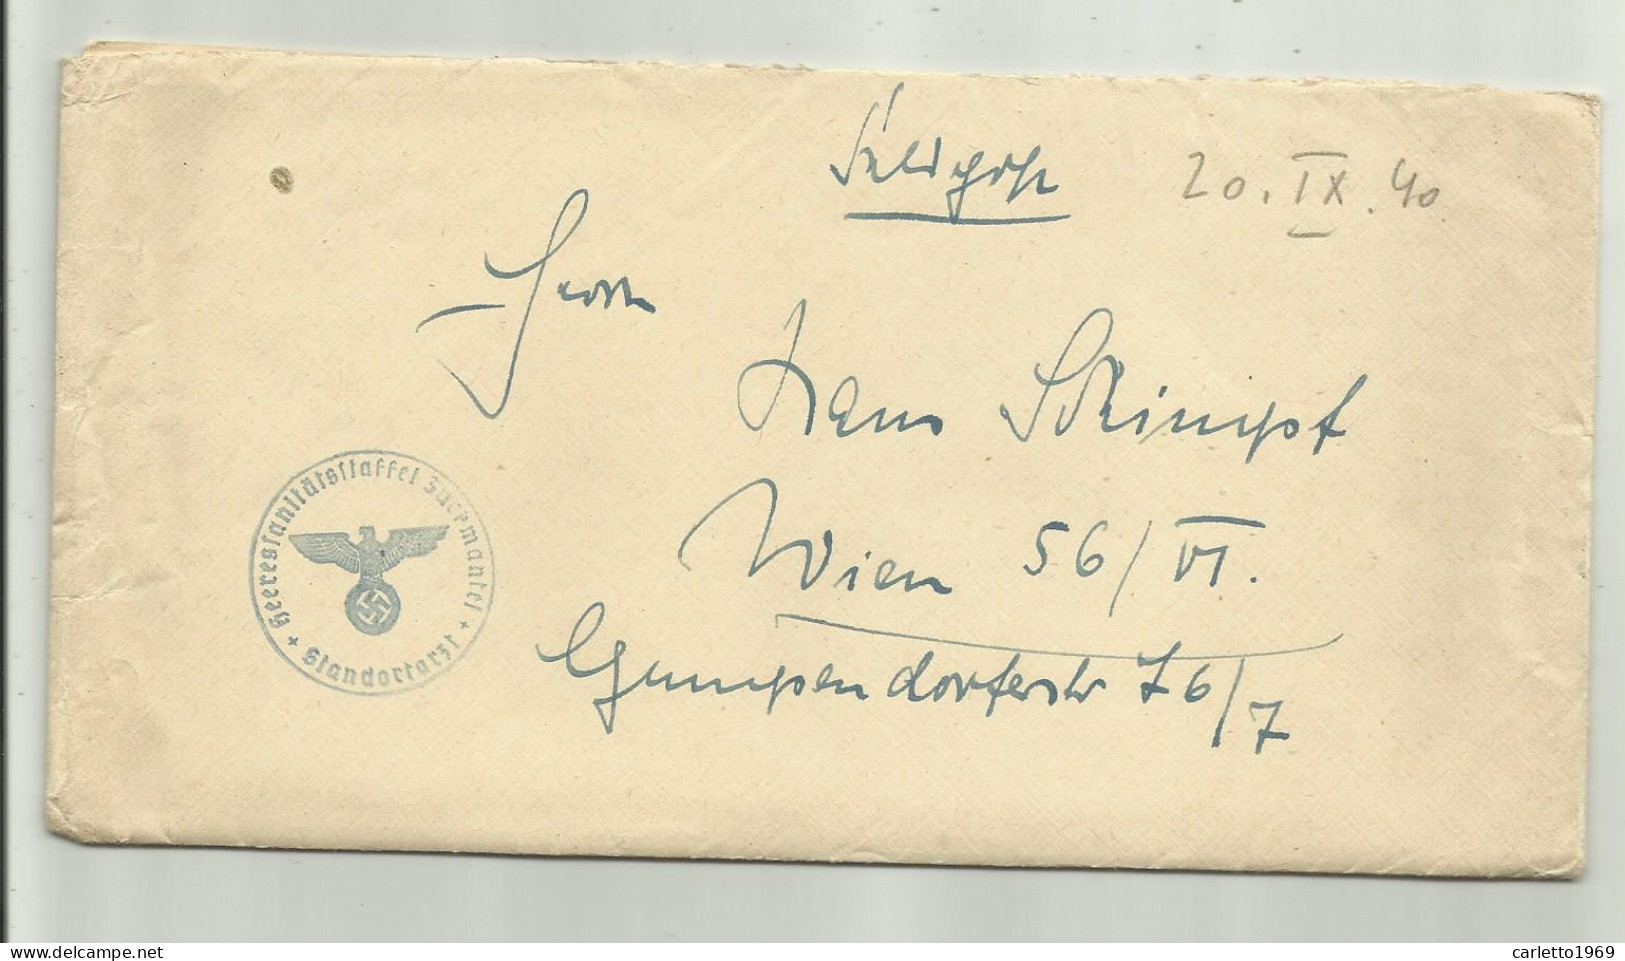   FELDPOST 1940   CON LETTERA  - Used Stamps